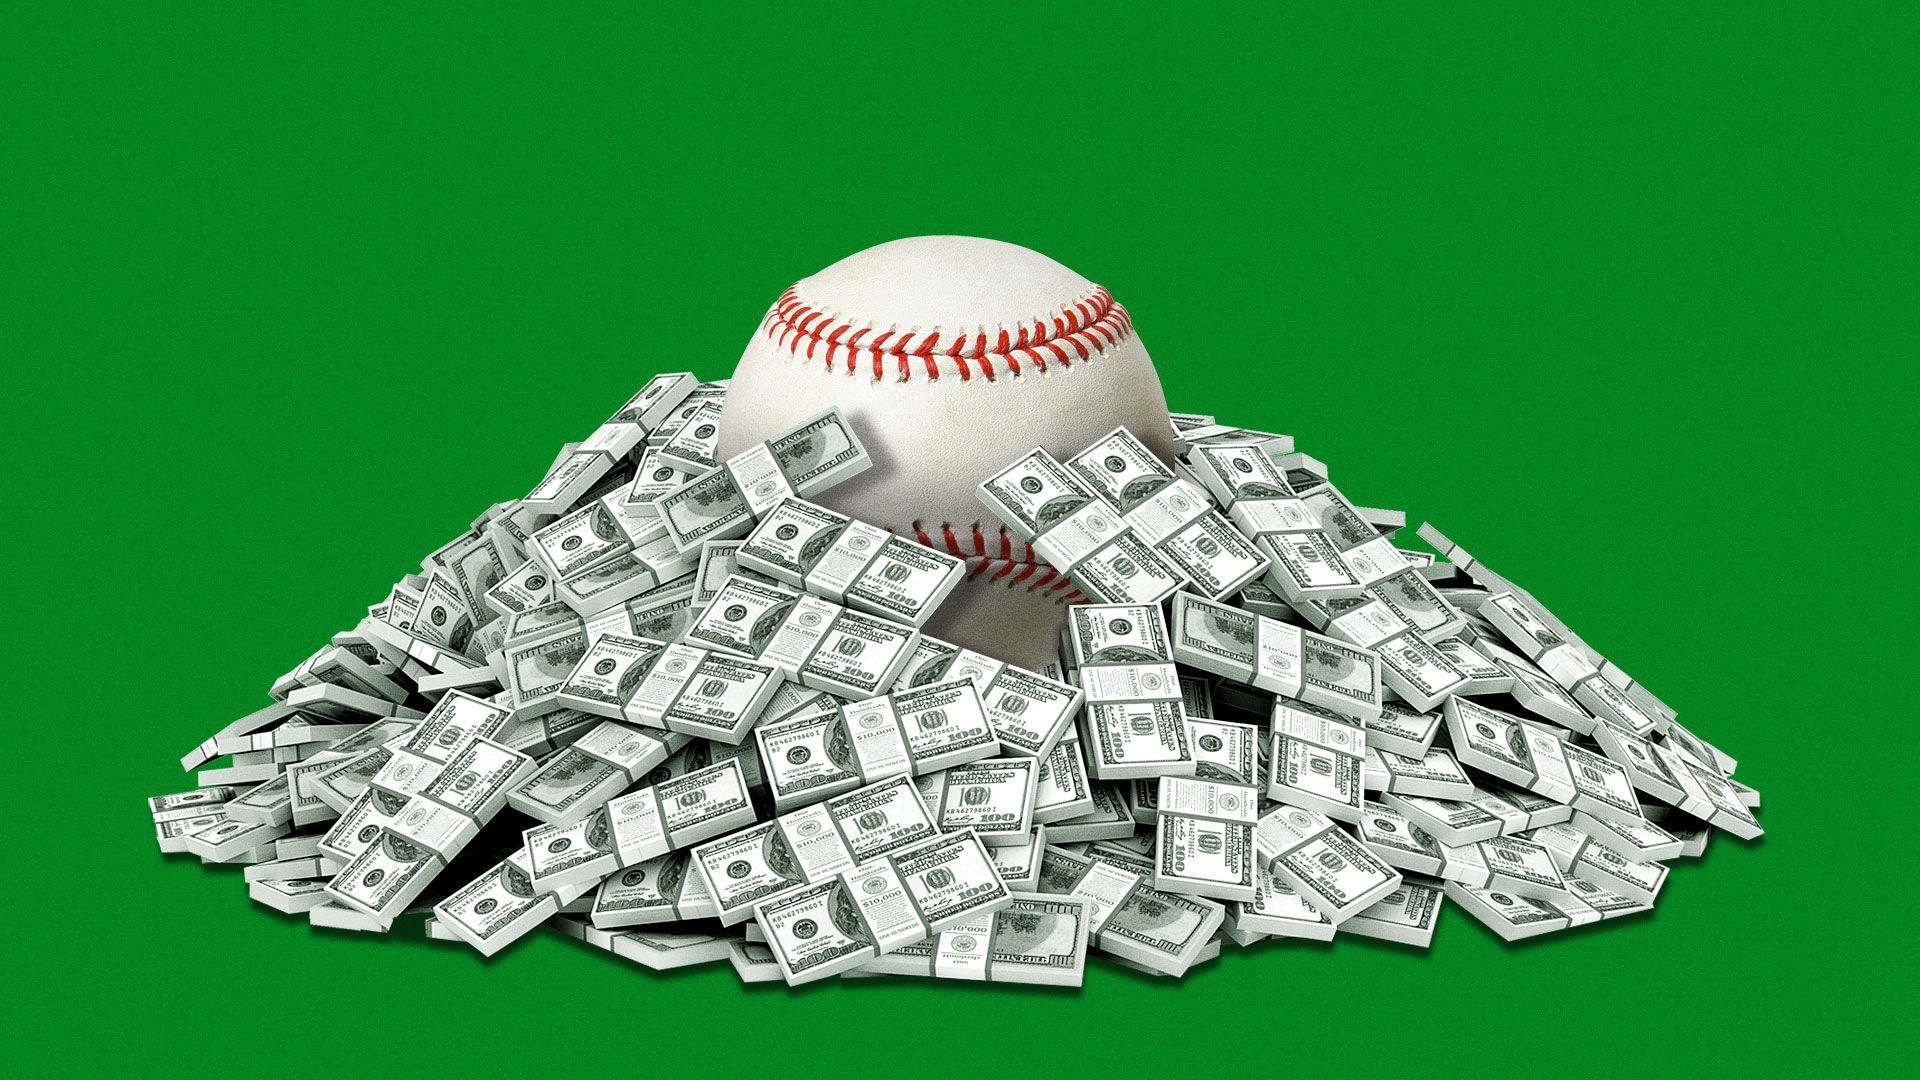 Illustration of baseball on top of a pile of money